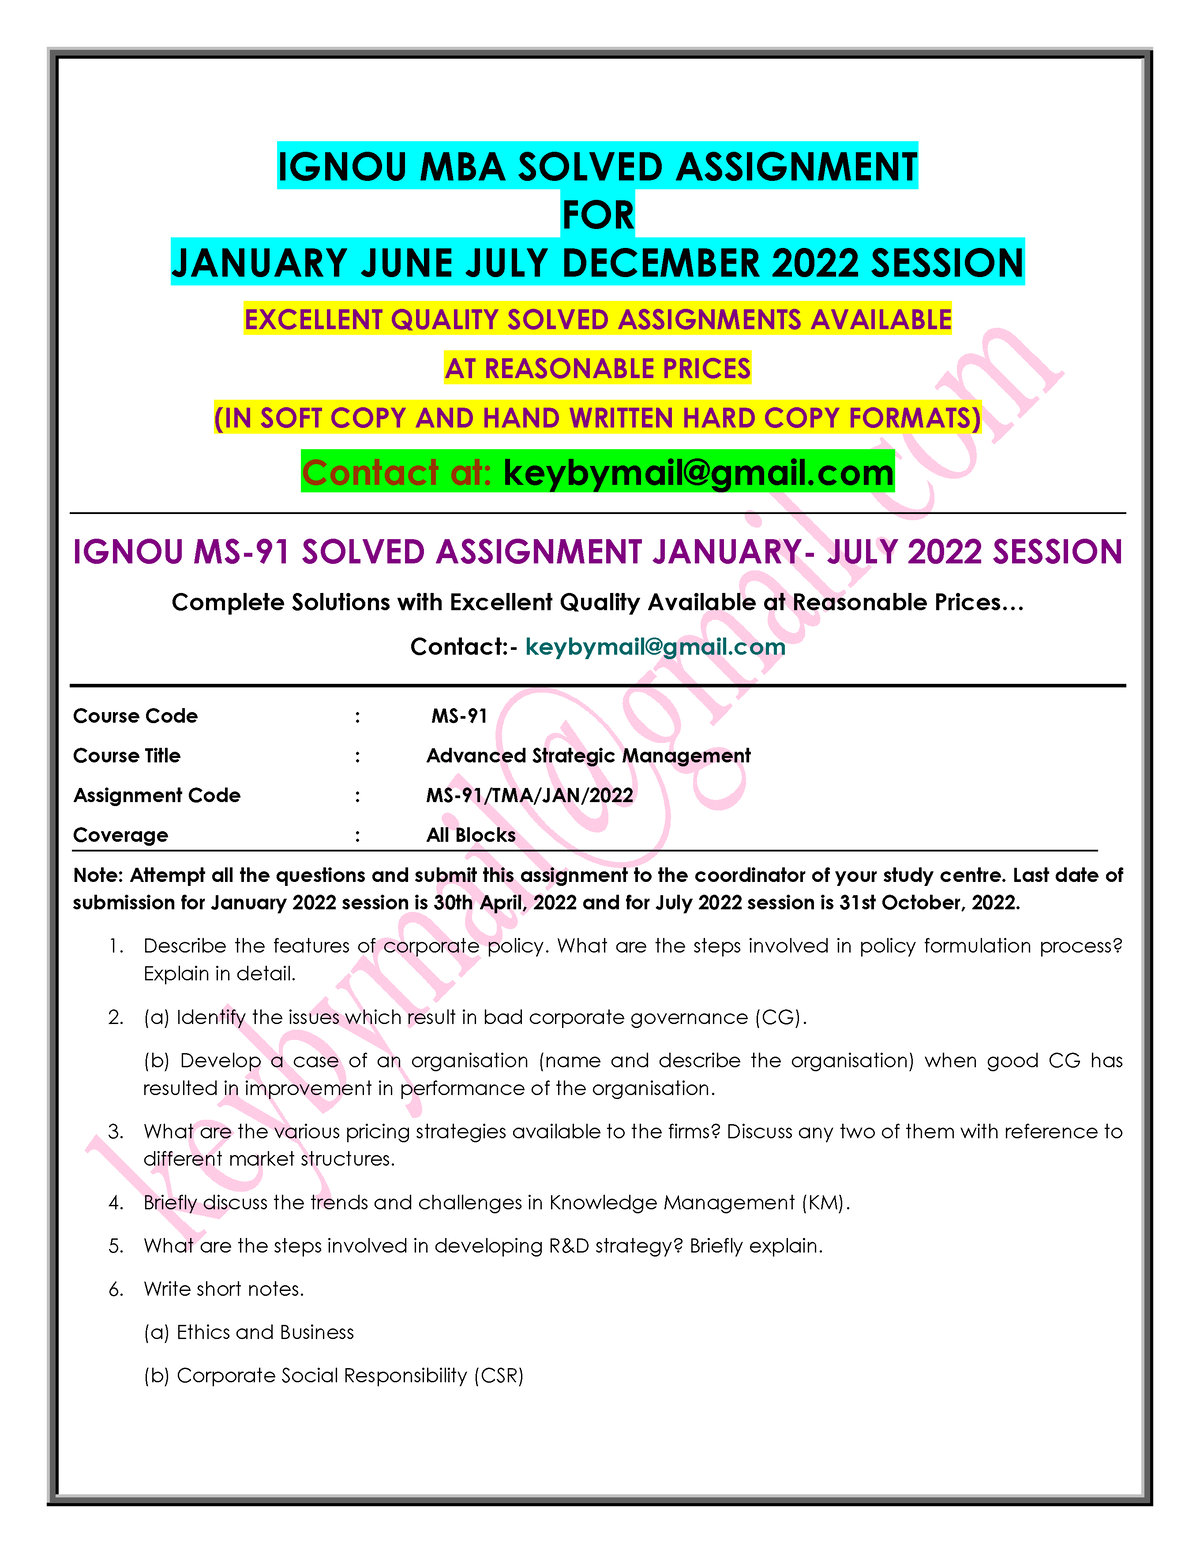 ignou assignment question 2022 july session